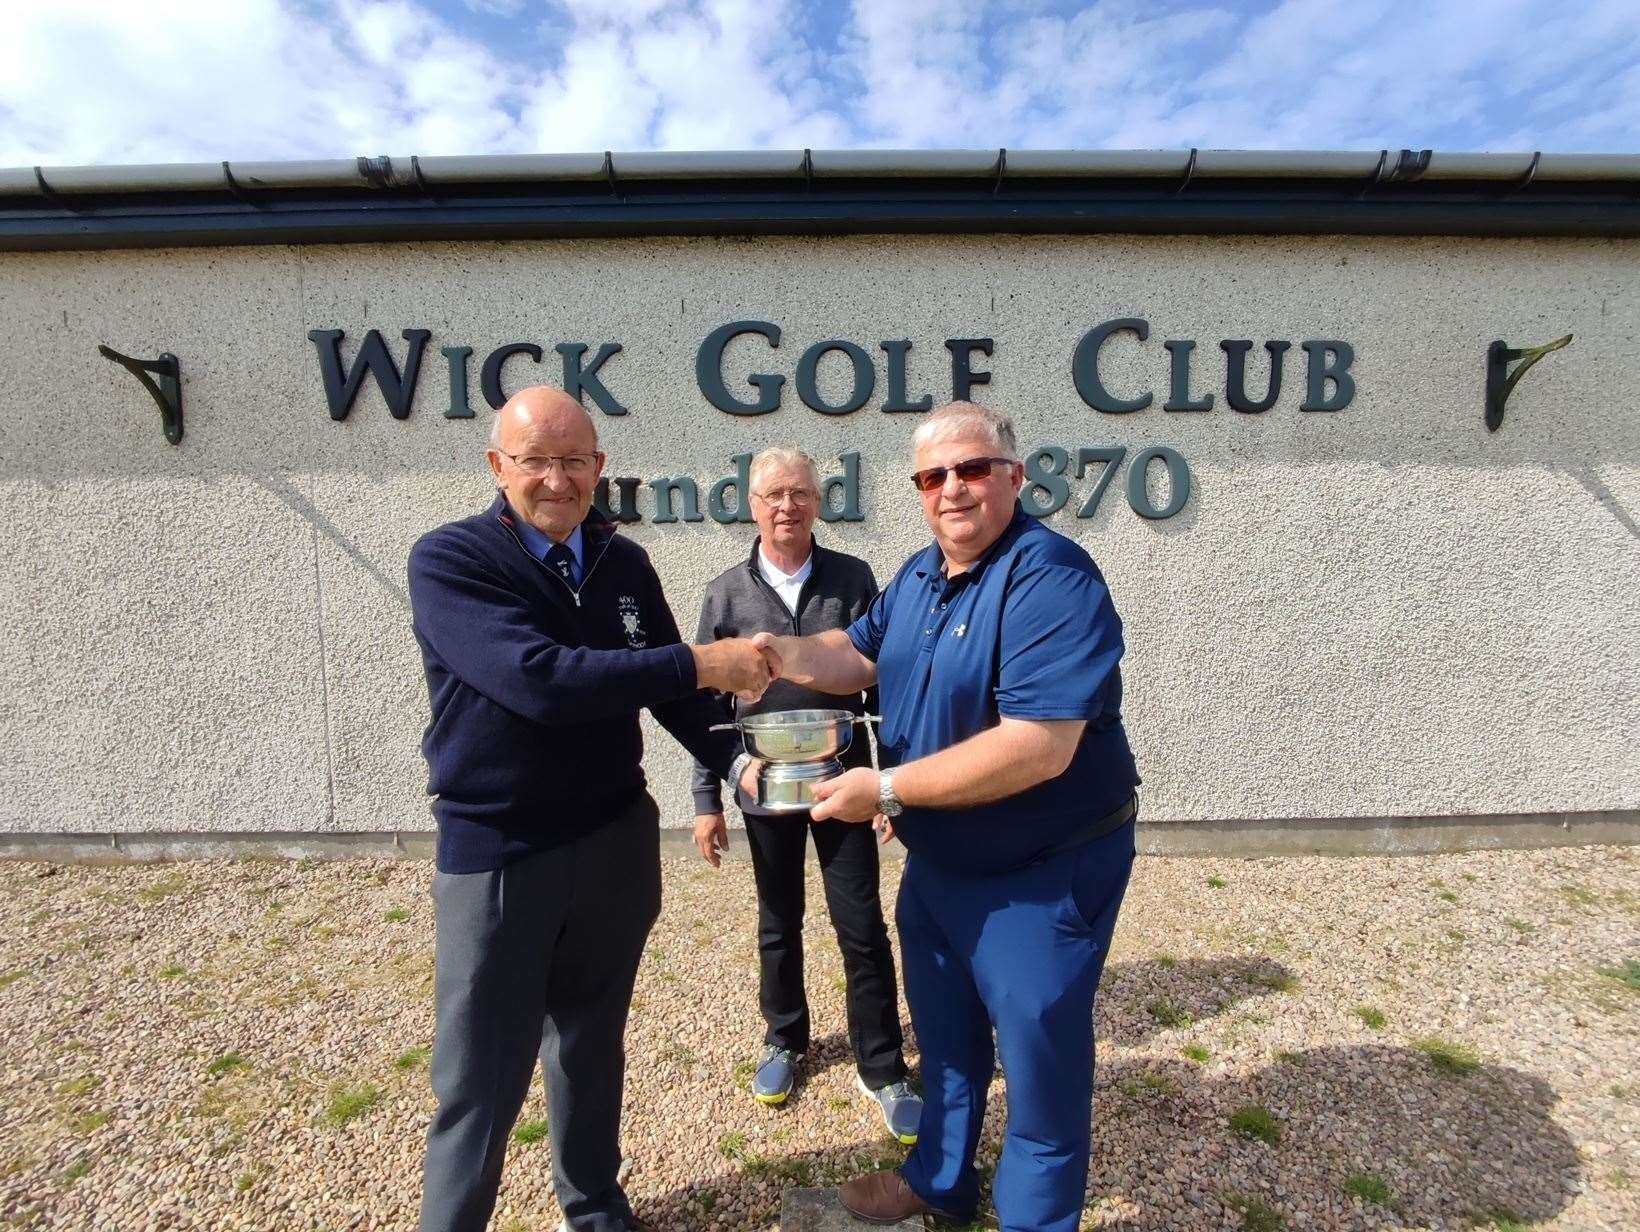 Willie Mackay, Royal Dornoch Golf Club (left), presents the John Sutherland Quaich to Ali Mackay, captain of Wick Golf Club. Looking on is Wick historian Roy Mackenzie. The award will be competed for annually.